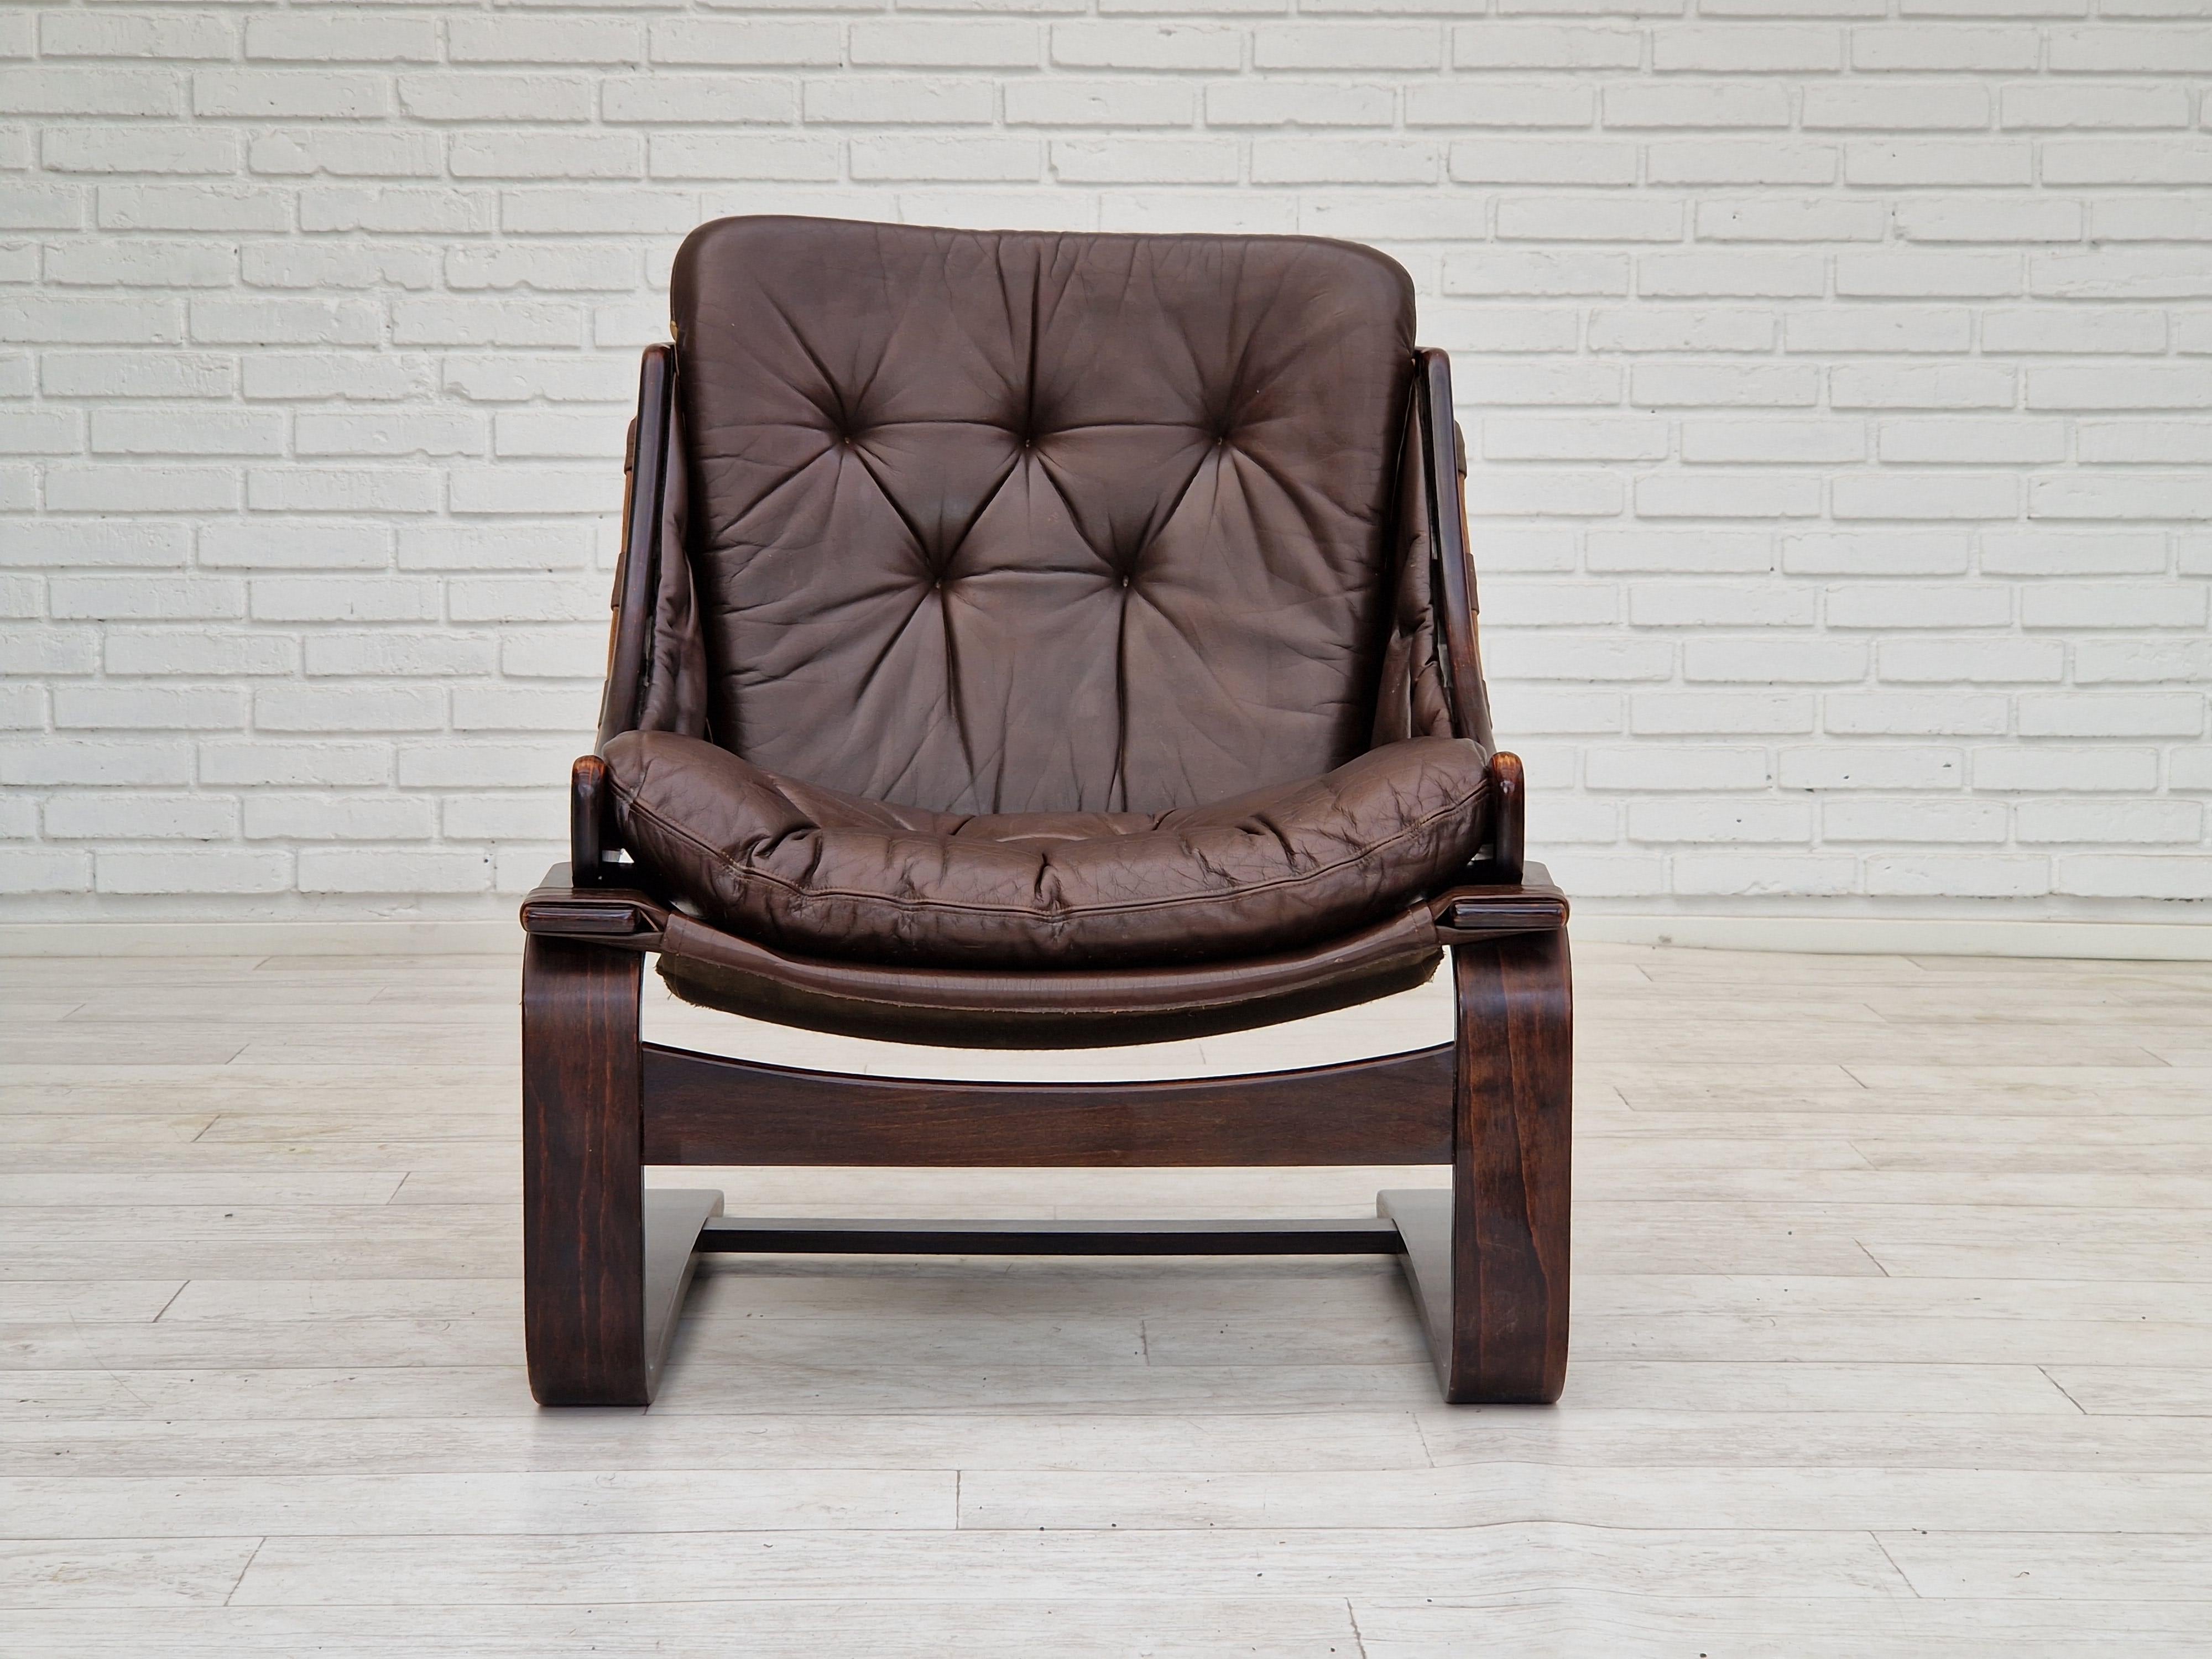 1970s, Brown leather lounge chair by Ake Fribytter for Nelo Sweden. Original very good condition: no smells and no stains. Loose cushions in brown leather, dark brown plywood, brown canvas fabric, natur leather straps.